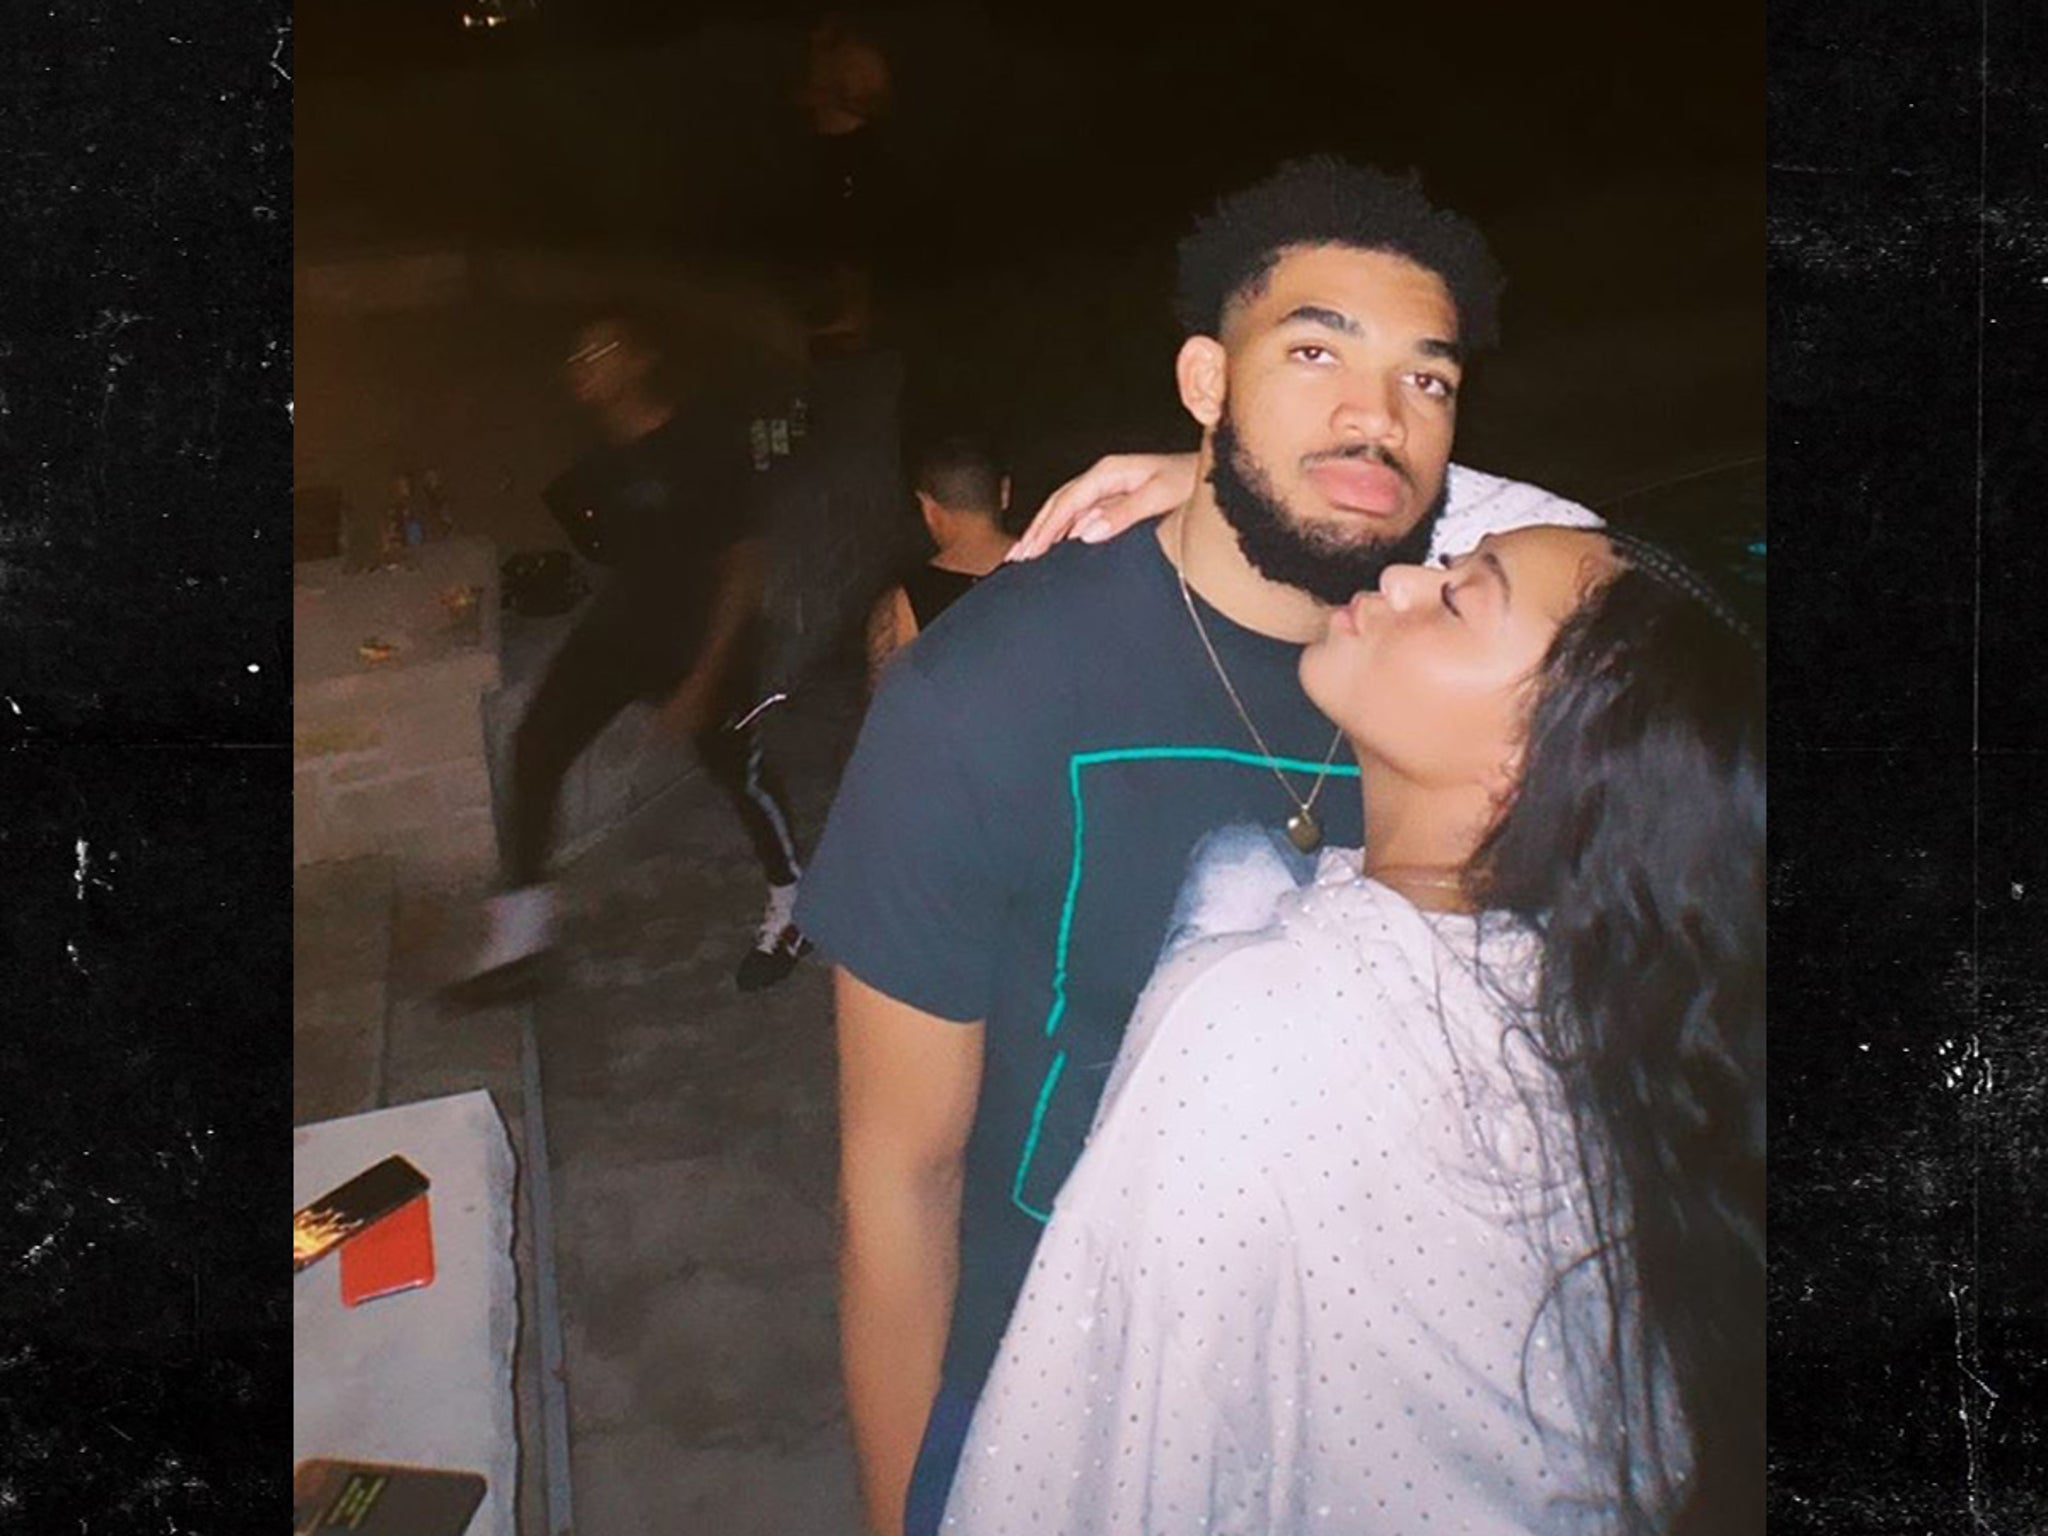 Jordyn Woods asks for prayers after Karl-Anthony Towns' COVID reveal